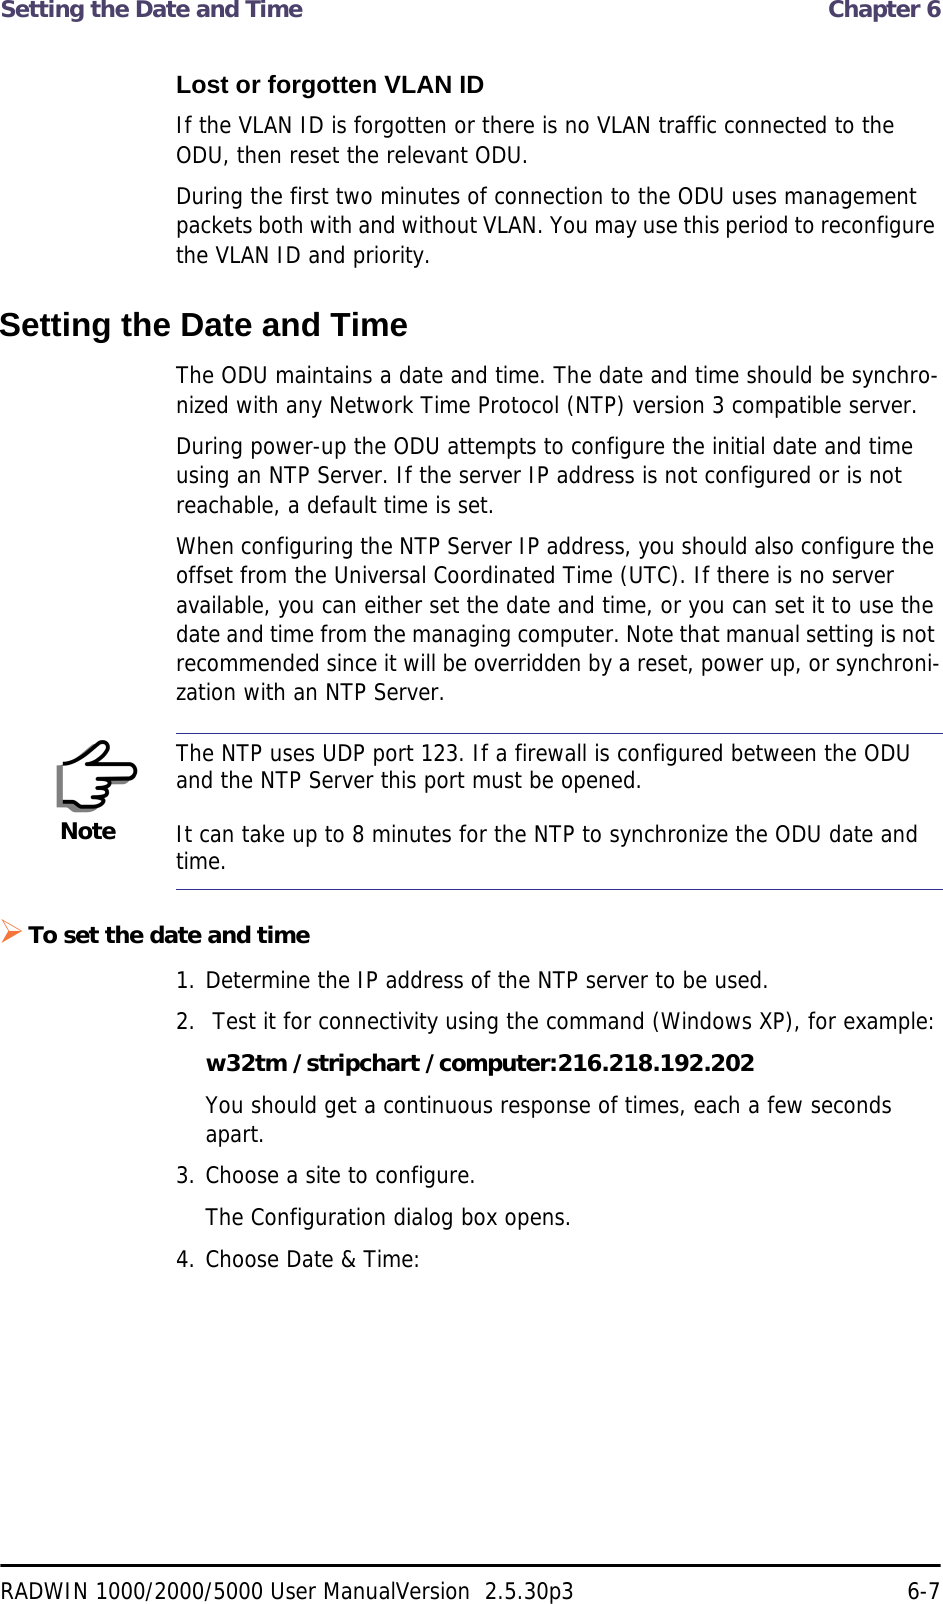 Setting the Date and Time  Chapter 6RADWIN 1000/2000/5000 User ManualVersion  2.5.30p3 6-7Lost or forgotten VLAN IDIf the VLAN ID is forgotten or there is no VLAN traffic connected to the ODU, then reset the relevant ODU.During the first two minutes of connection to the ODU uses management packets both with and without VLAN. You may use this period to reconfigure the VLAN ID and priority.Setting the Date and TimeThe ODU maintains a date and time. The date and time should be synchro-nized with any Network Time Protocol (NTP) version 3 compatible server.During power-up the ODU attempts to configure the initial date and time using an NTP Server. If the server IP address is not configured or is not reachable, a default time is set.When configuring the NTP Server IP address, you should also configure the offset from the Universal Coordinated Time (UTC). If there is no server available, you can either set the date and time, or you can set it to use the date and time from the managing computer. Note that manual setting is not recommended since it will be overridden by a reset, power up, or synchroni-zation with an NTP Server.To set the date and time1. Determine the IP address of the NTP server to be used.2.  Test it for connectivity using the command (Windows XP), for example:w32tm /stripchart /computer:216.218.192.202You should get a continuous response of times, each a few seconds apart.3. Choose a site to configure.The Configuration dialog box opens.4. Choose Date &amp; Time:NoteThe NTP uses UDP port 123. If a firewall is configured between the ODU and the NTP Server this port must be opened.It can take up to 8 minutes for the NTP to synchronize the ODU date and time.